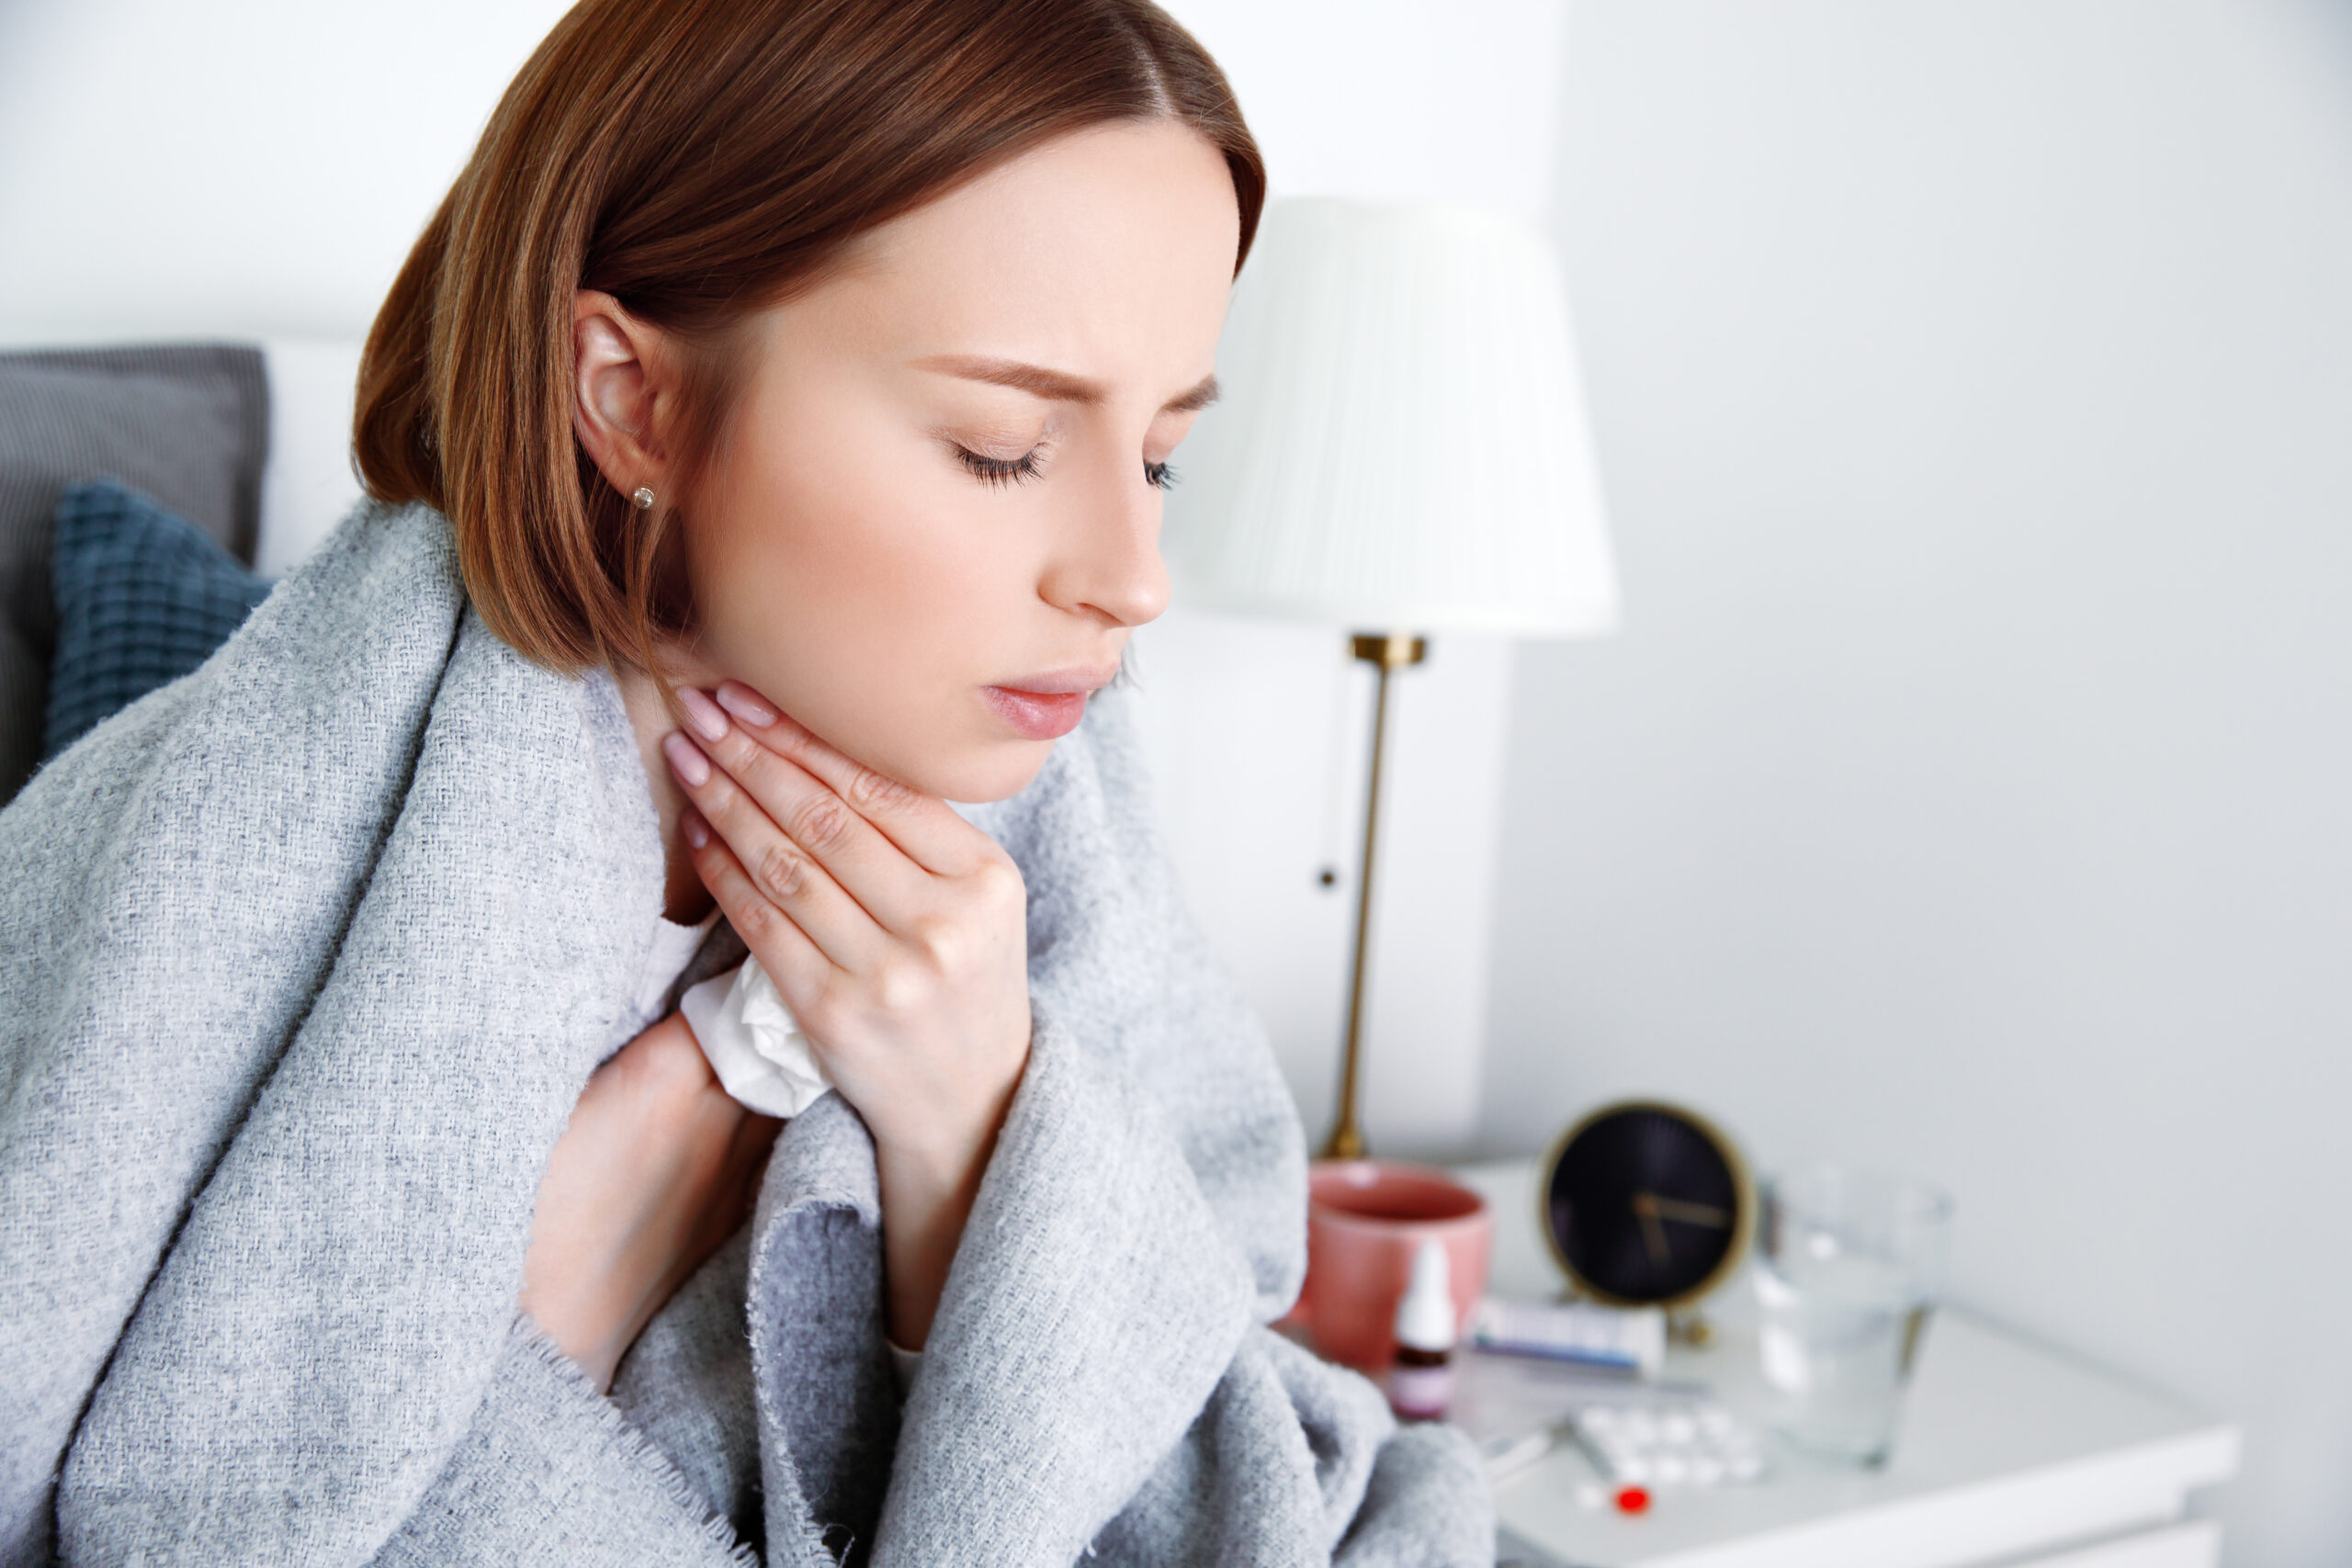 Laryngitis: What Is, Causes, Symptoms, Treatment, and Prevention